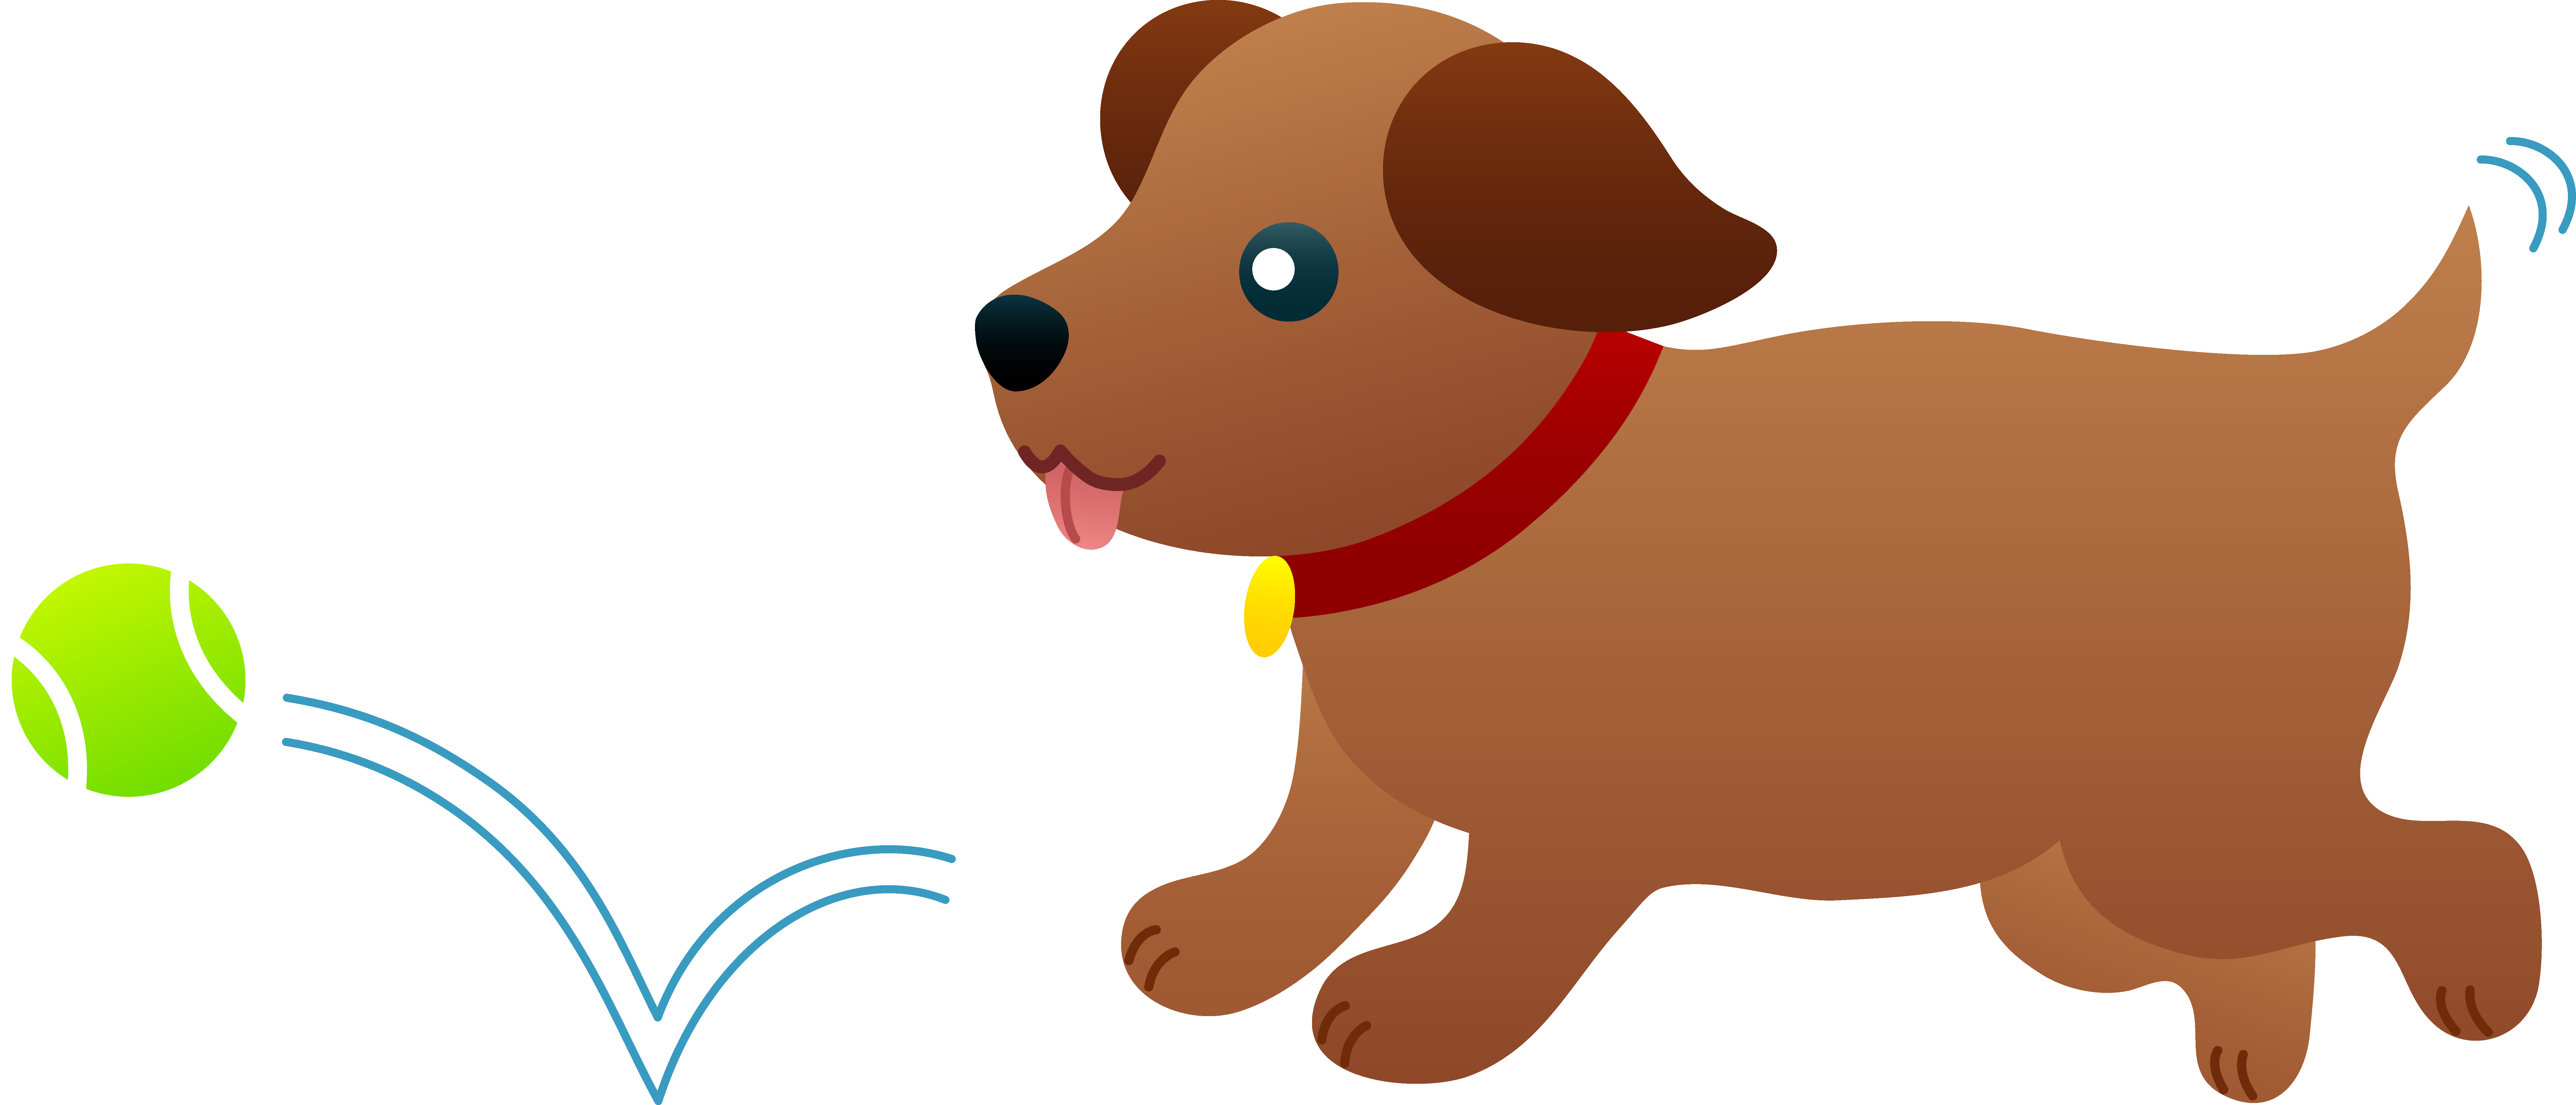 clip art of girl and dog - photo #39